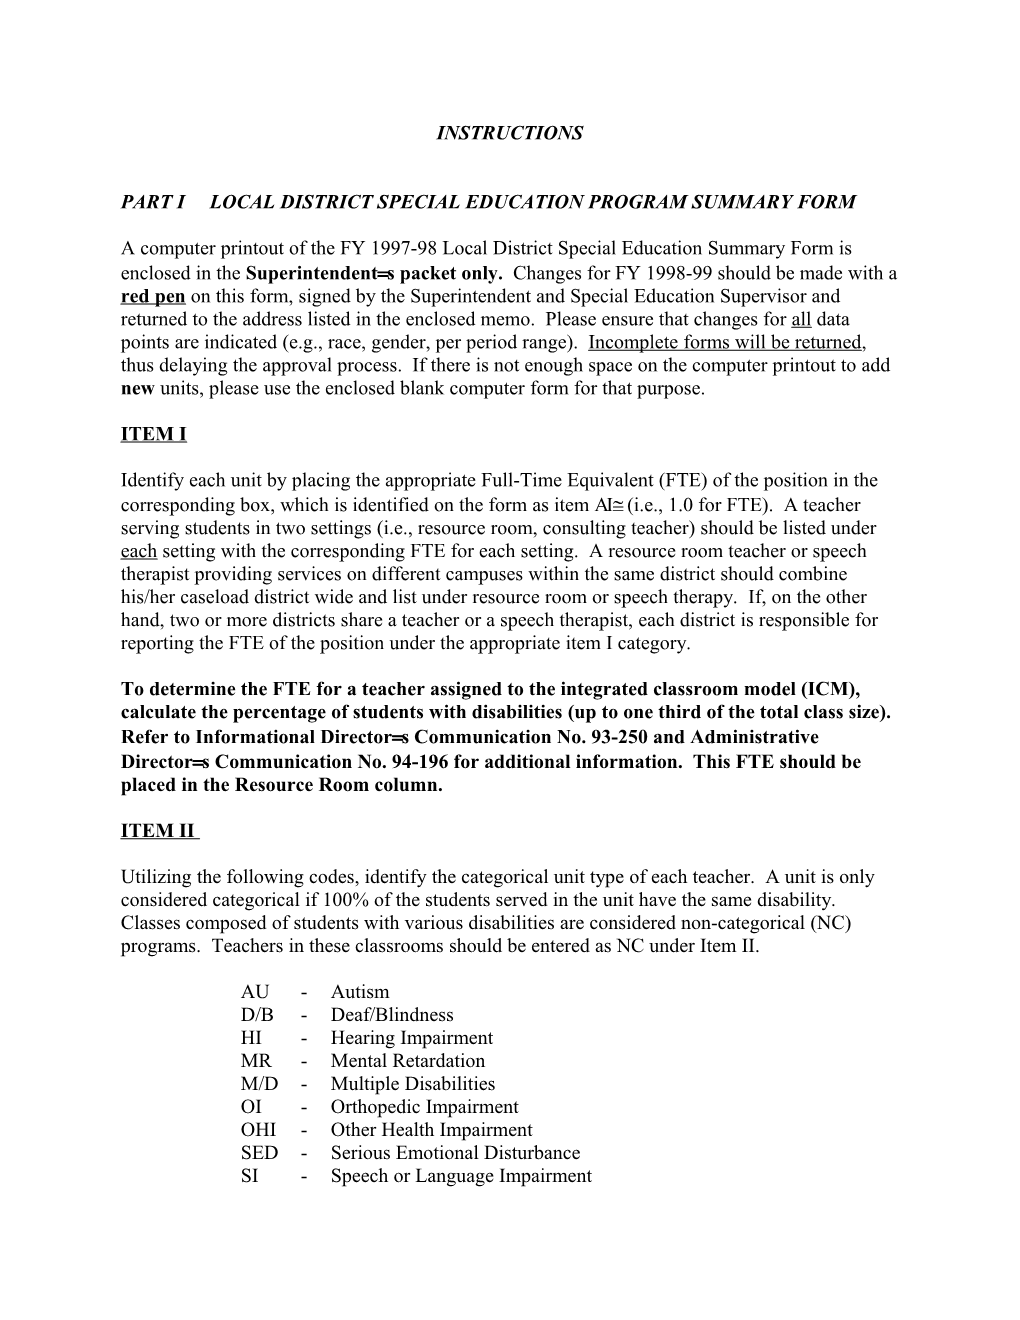 Part I Local District Special Education Program Summary Form